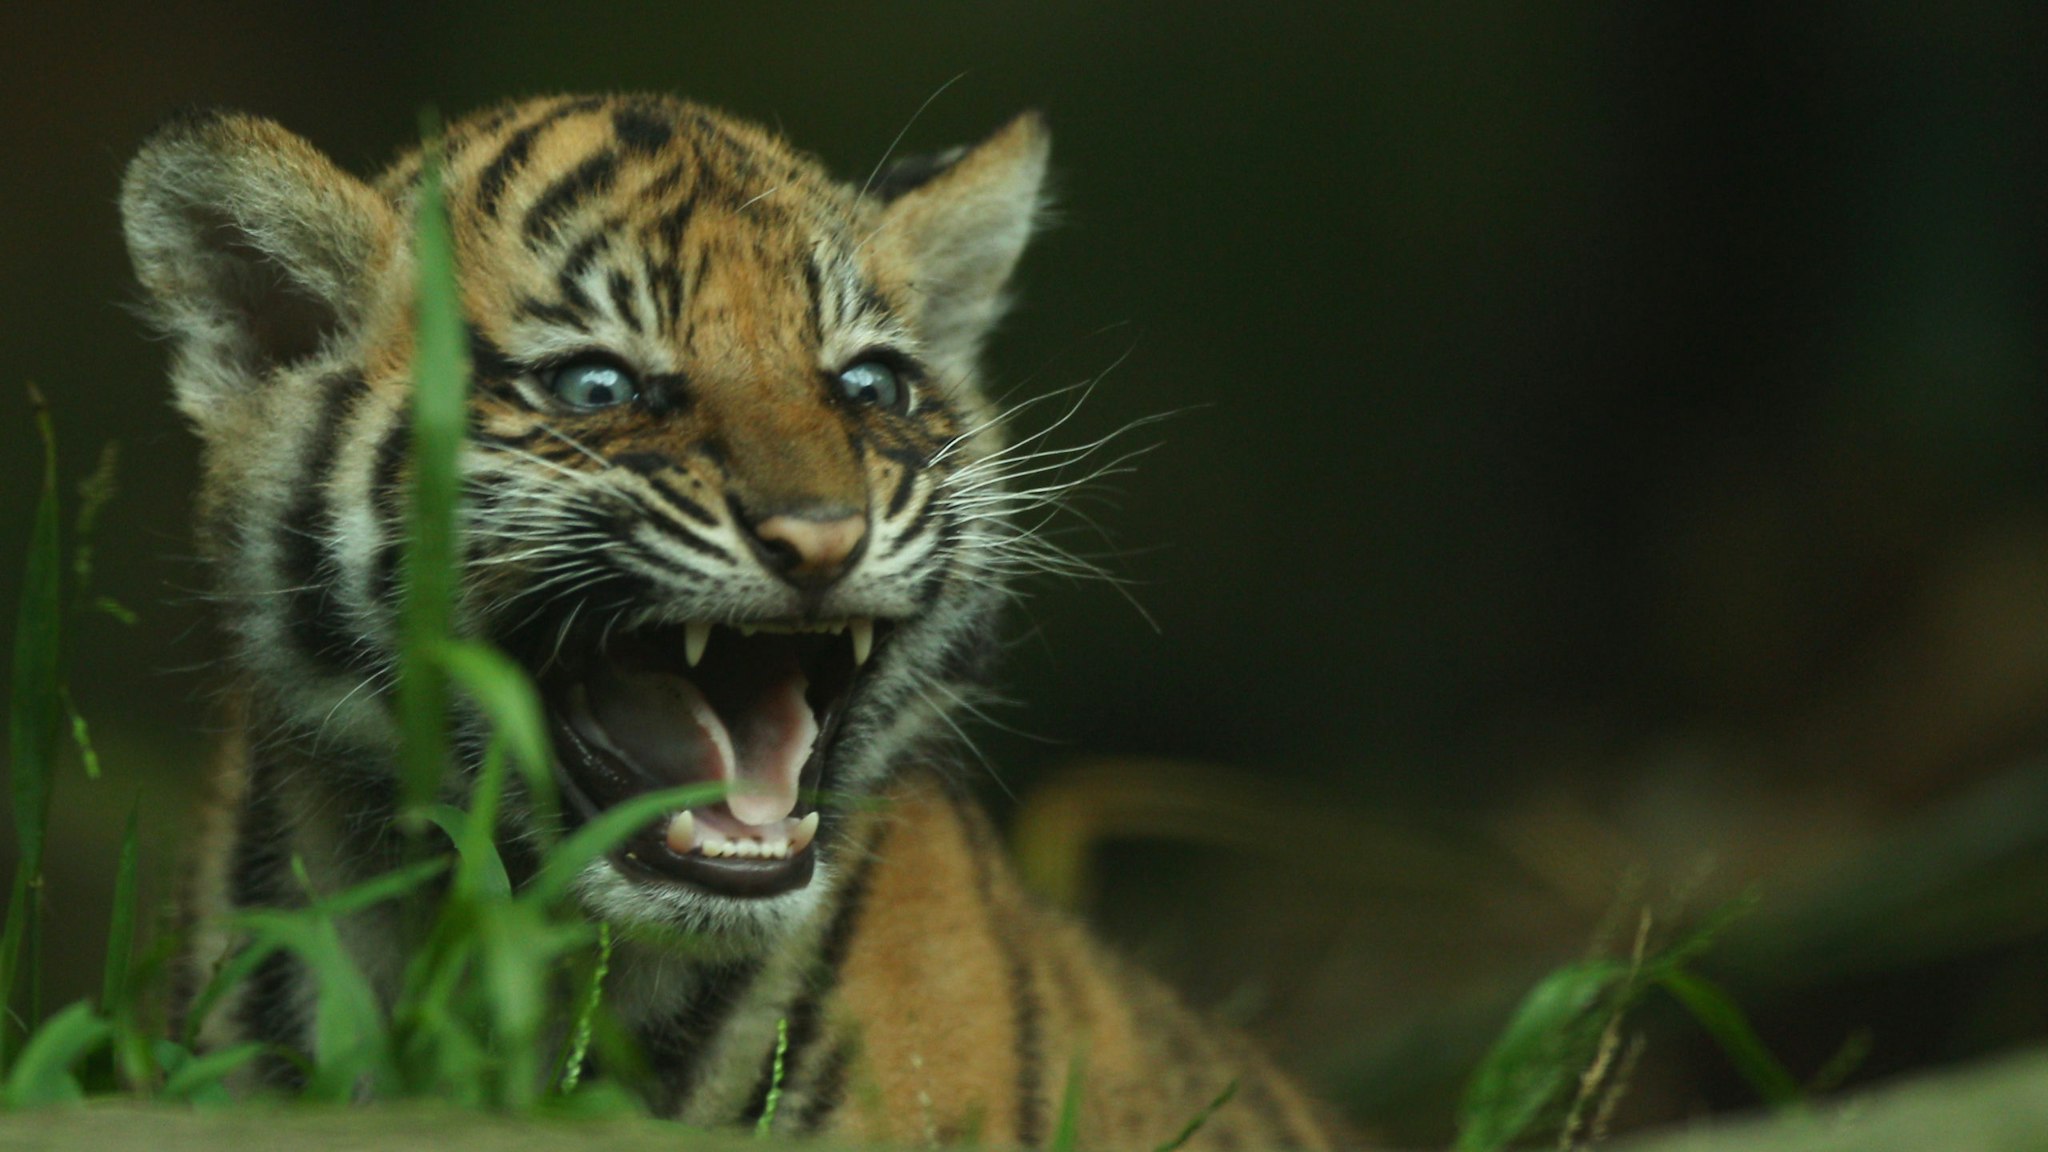 YDNEY, AUSTRALIA - OCTOBER 25: A Sumatran tiger cub is seen on display at Taronga Zoo on October 25, 2011 in Sydney, Australia. The Sumatran tiger cubs, born in August to mother Jumilah, will meet the public for the first time this week. (Photo by Mark Kolbe/Getty Images)